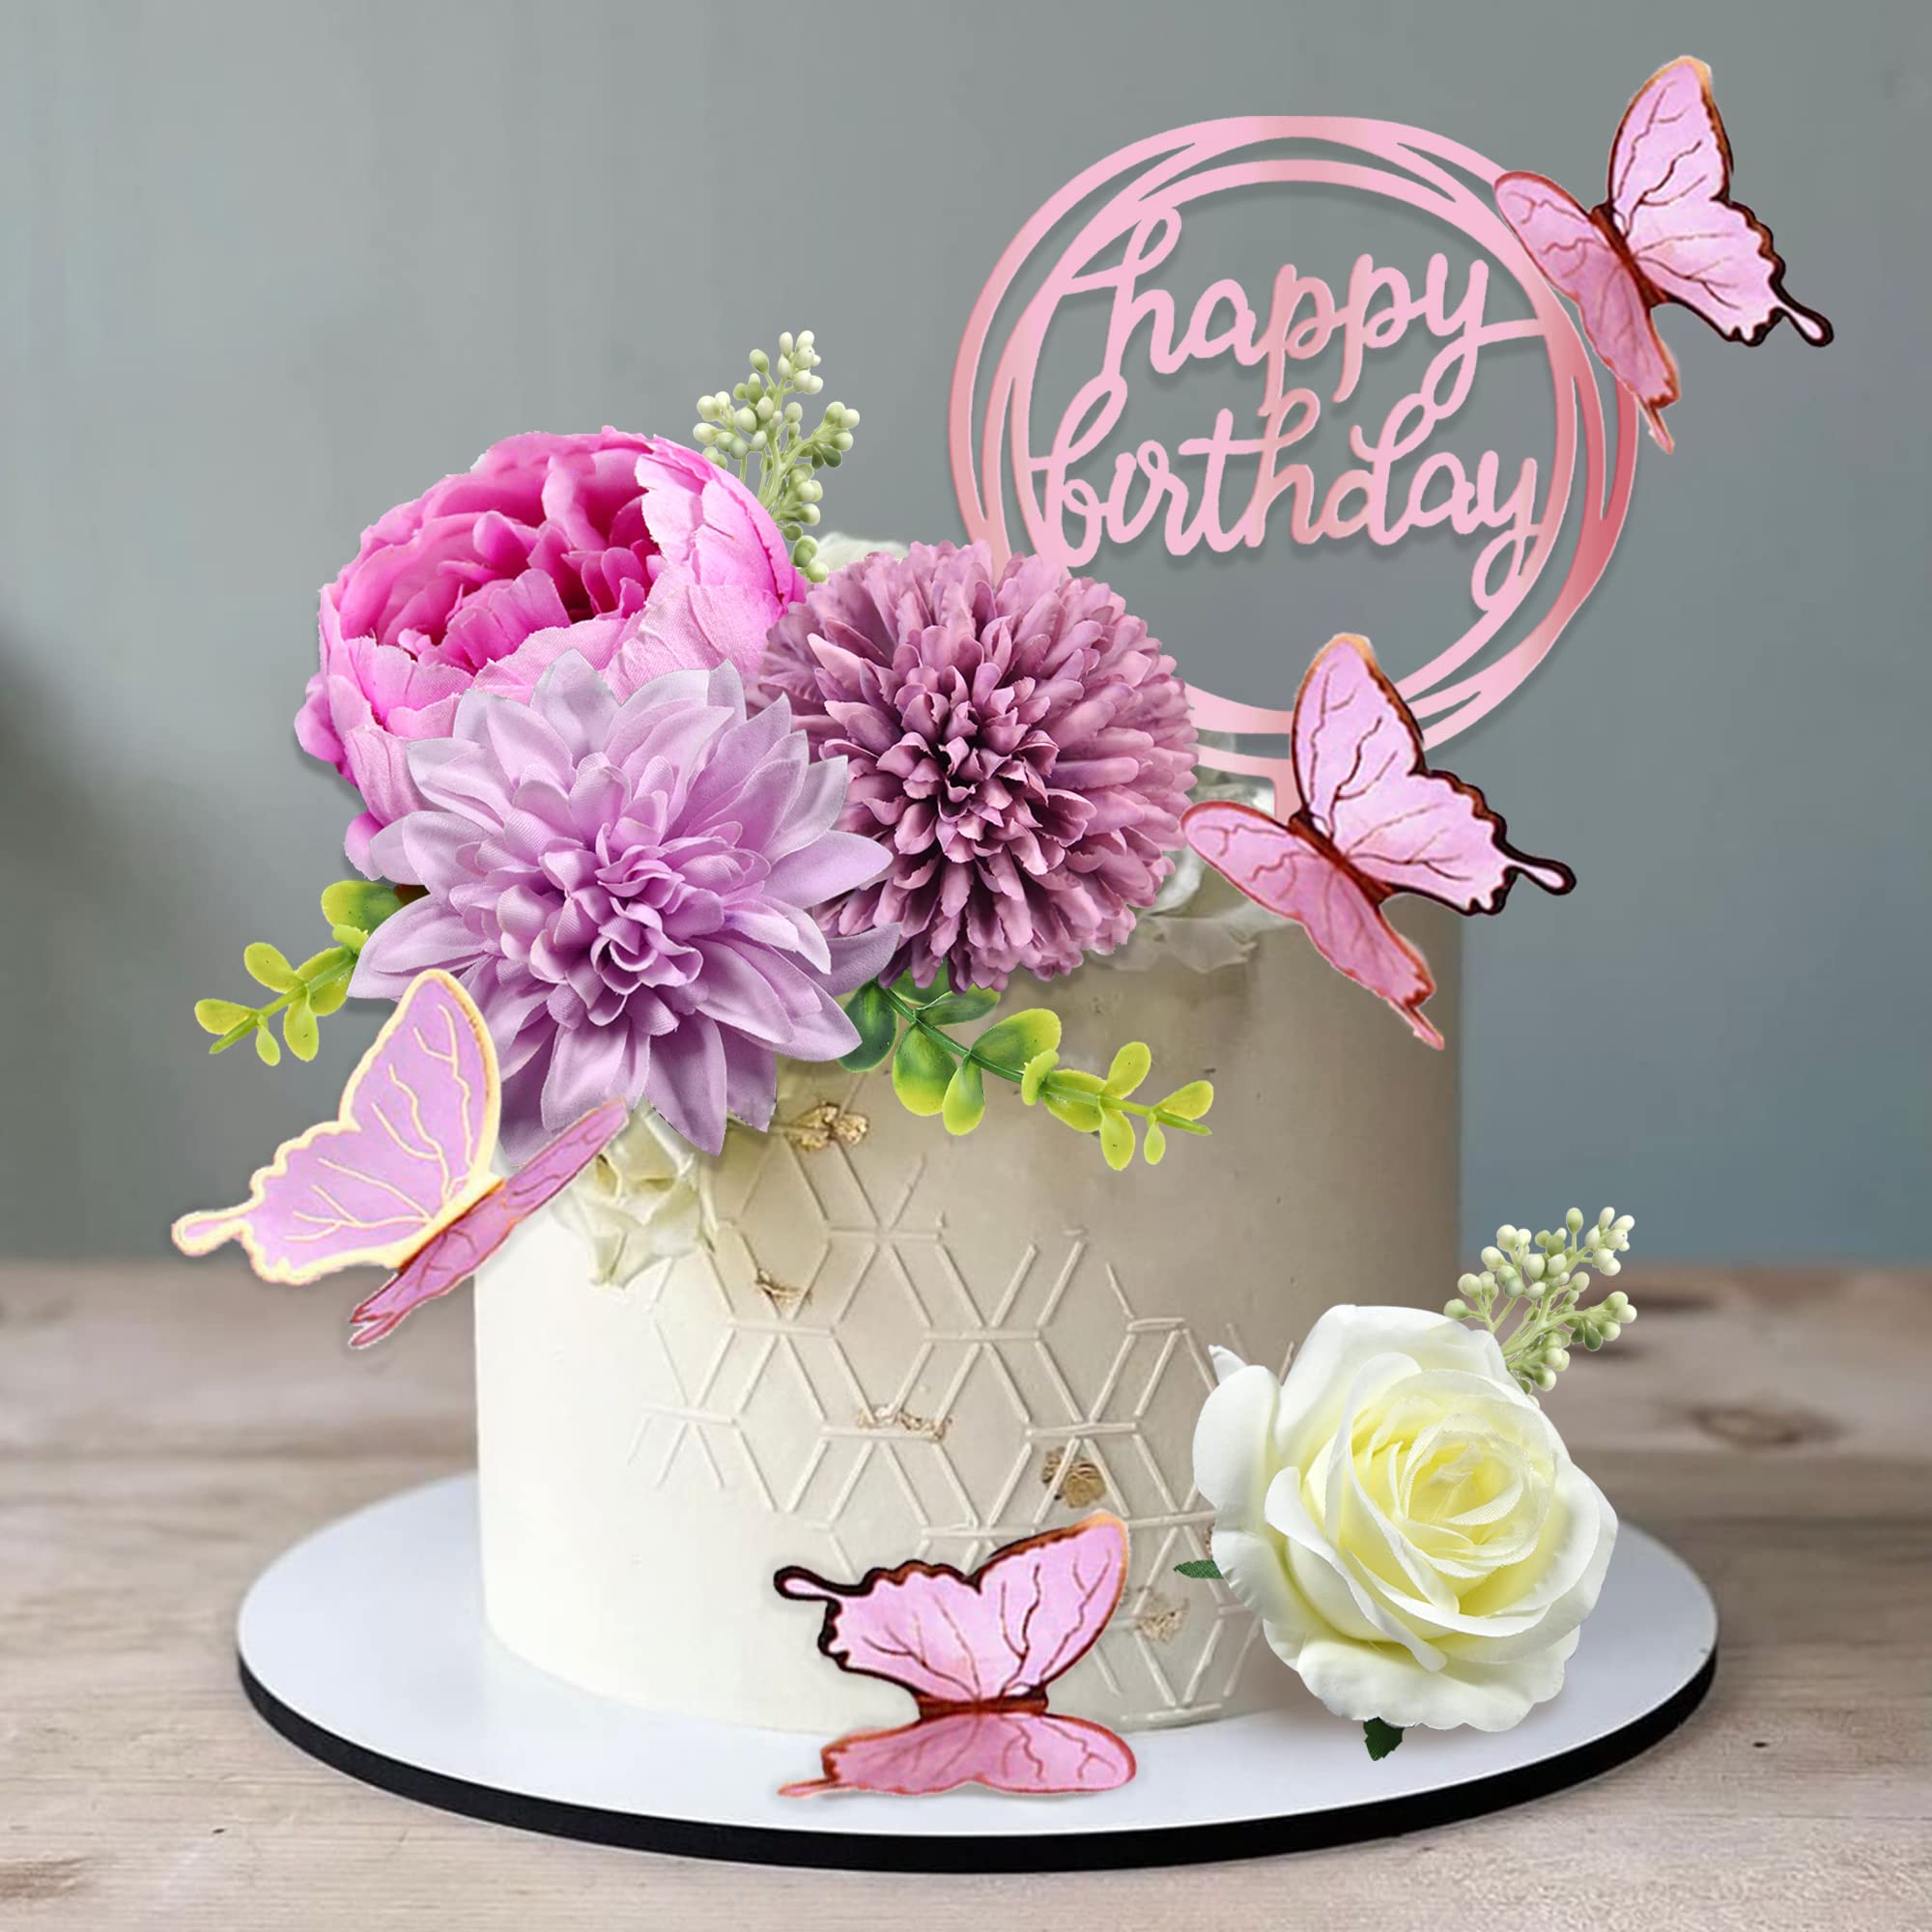 Close-up of a Birthday Cake with Flowers · Free Stock Photo